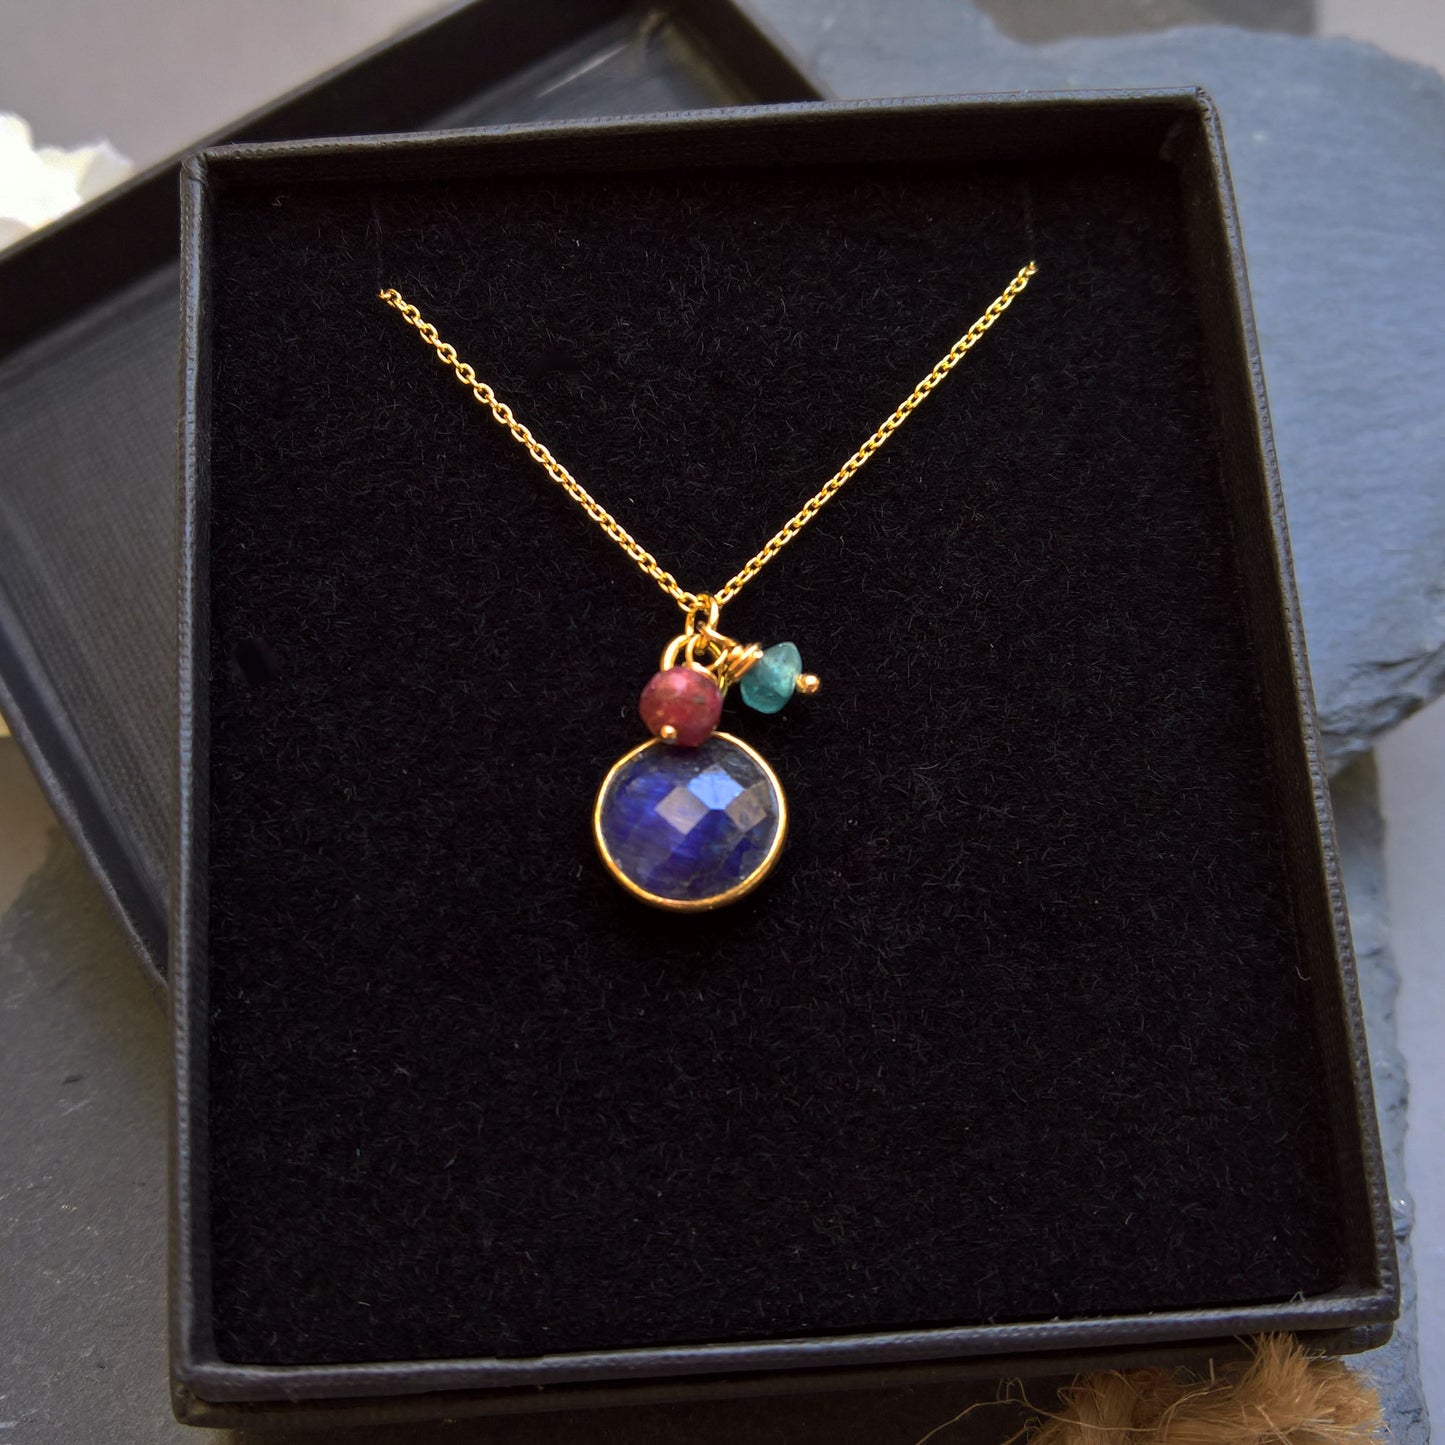 Blue sapphire circle pendant necklace in gold vermeil silver